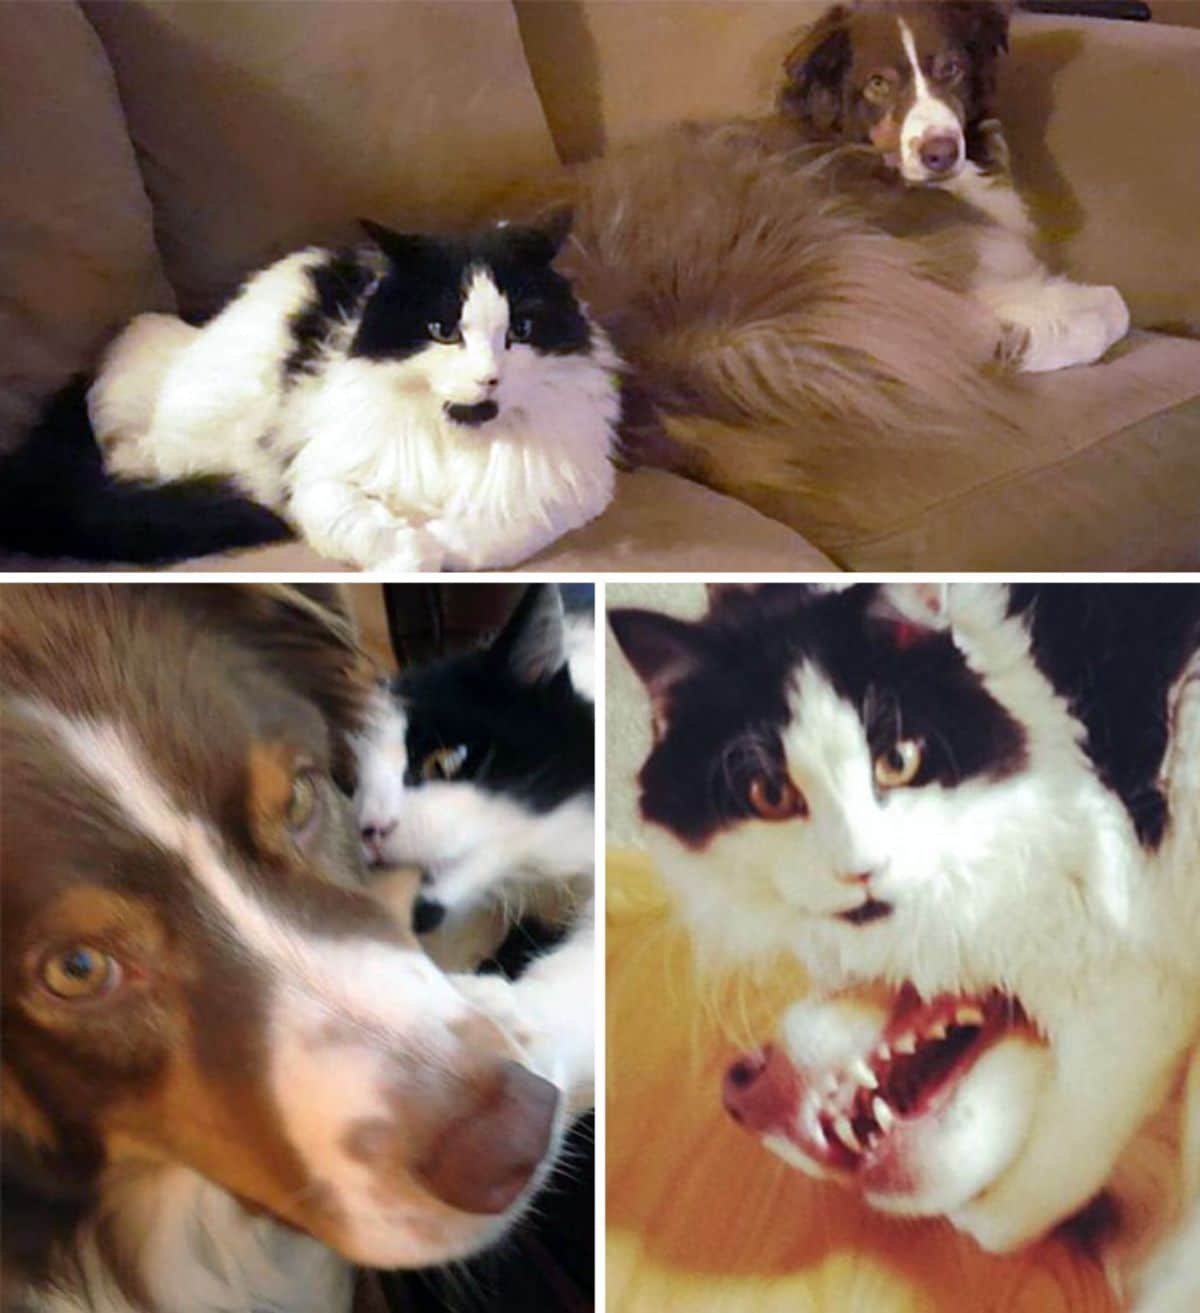 1 photo of a fluffy black and white cat sitting next to a fluffy brown dog and 2 photos of the cat bothering the dog